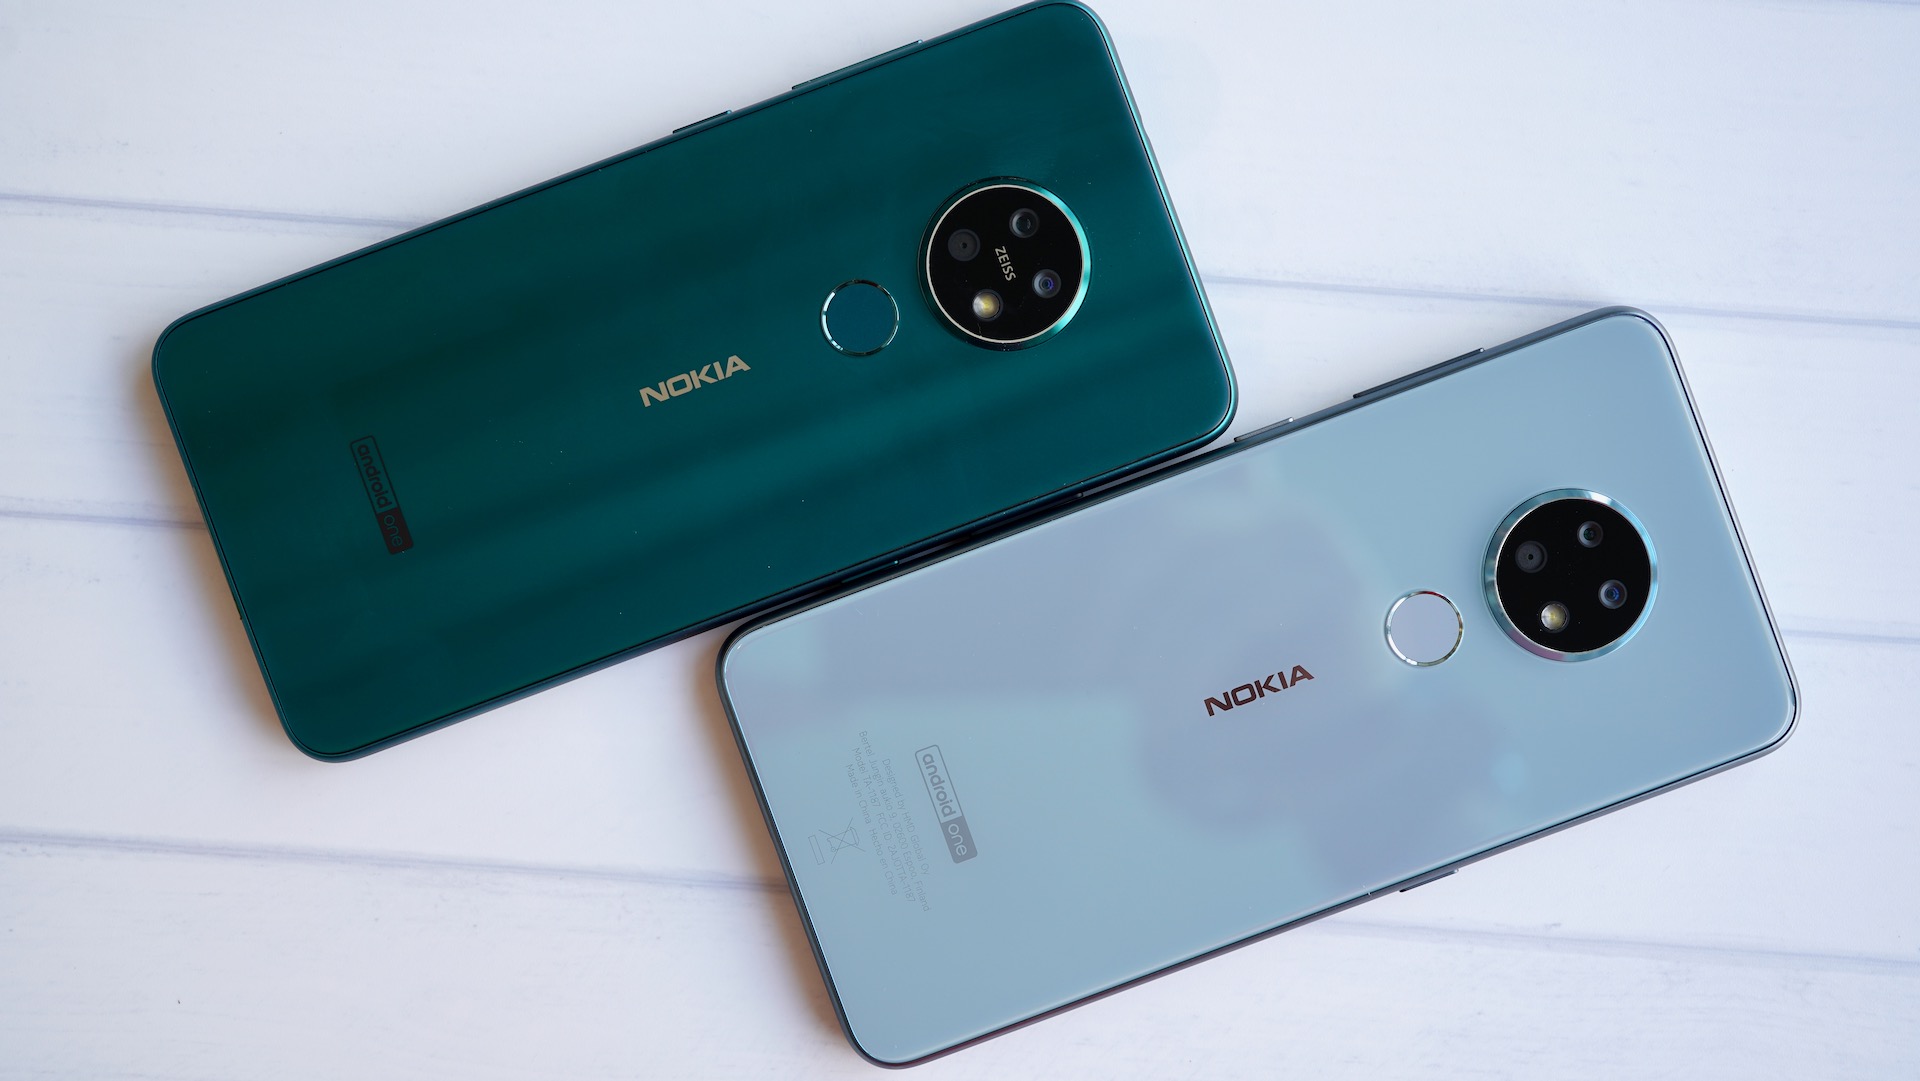 Nokia 6.2 With Triple Rear Camera Setup To Launch In India